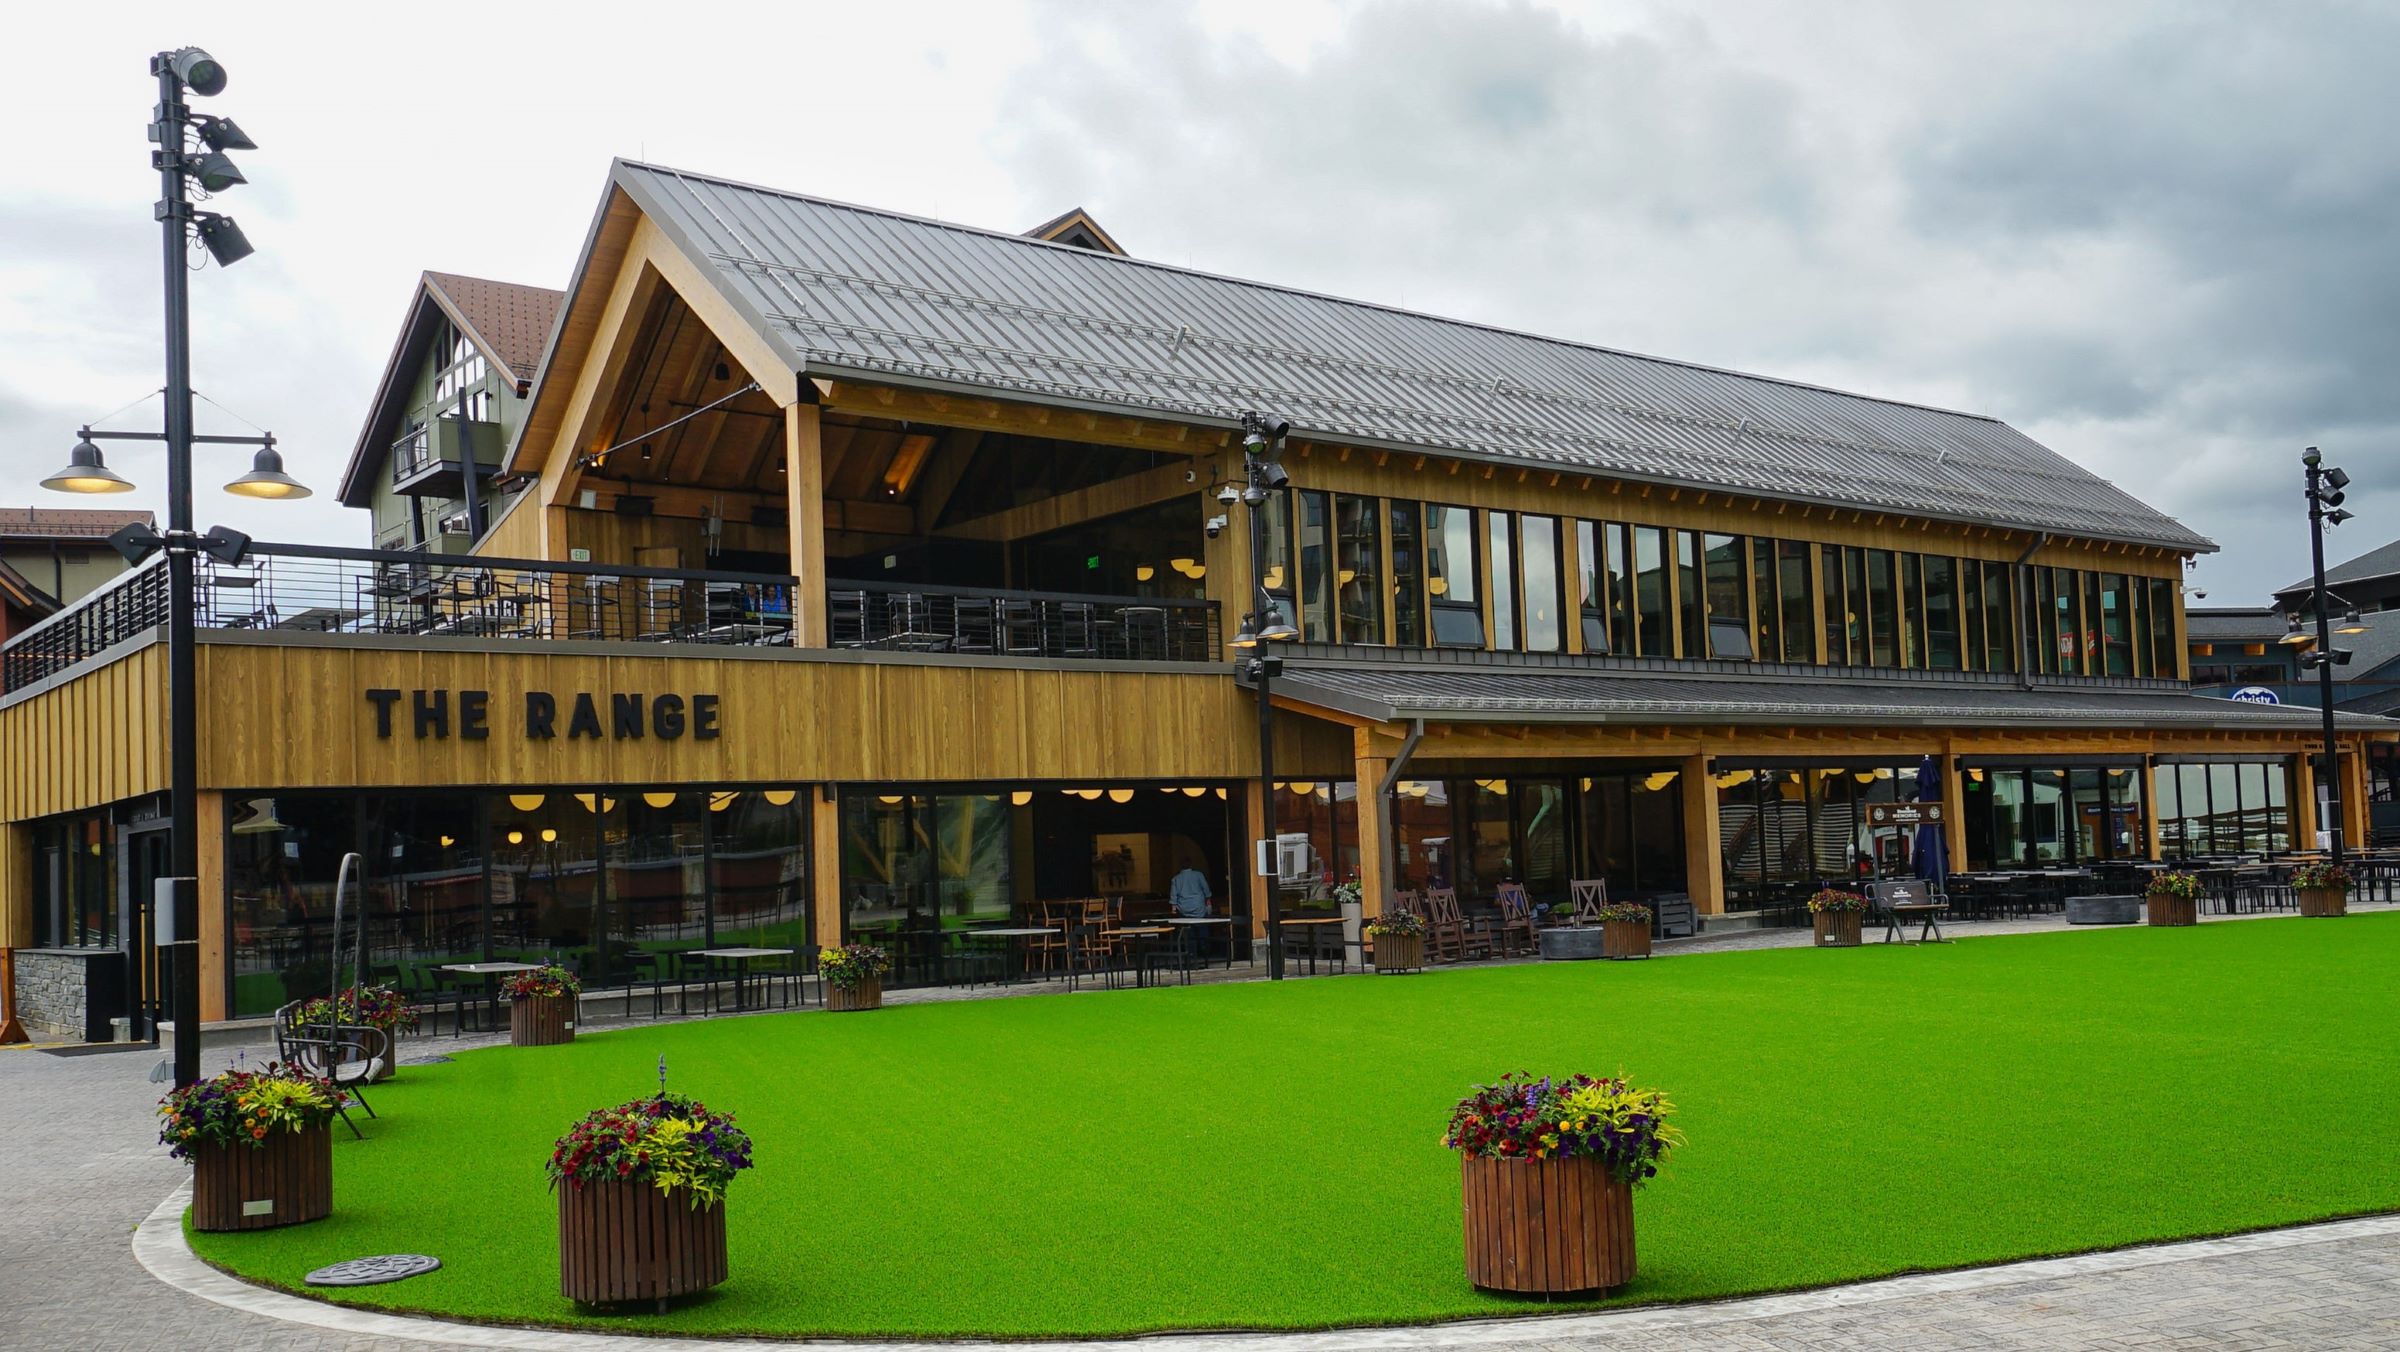 Exterior view of The Range Food & Drink Hall at Steamboat Resort.